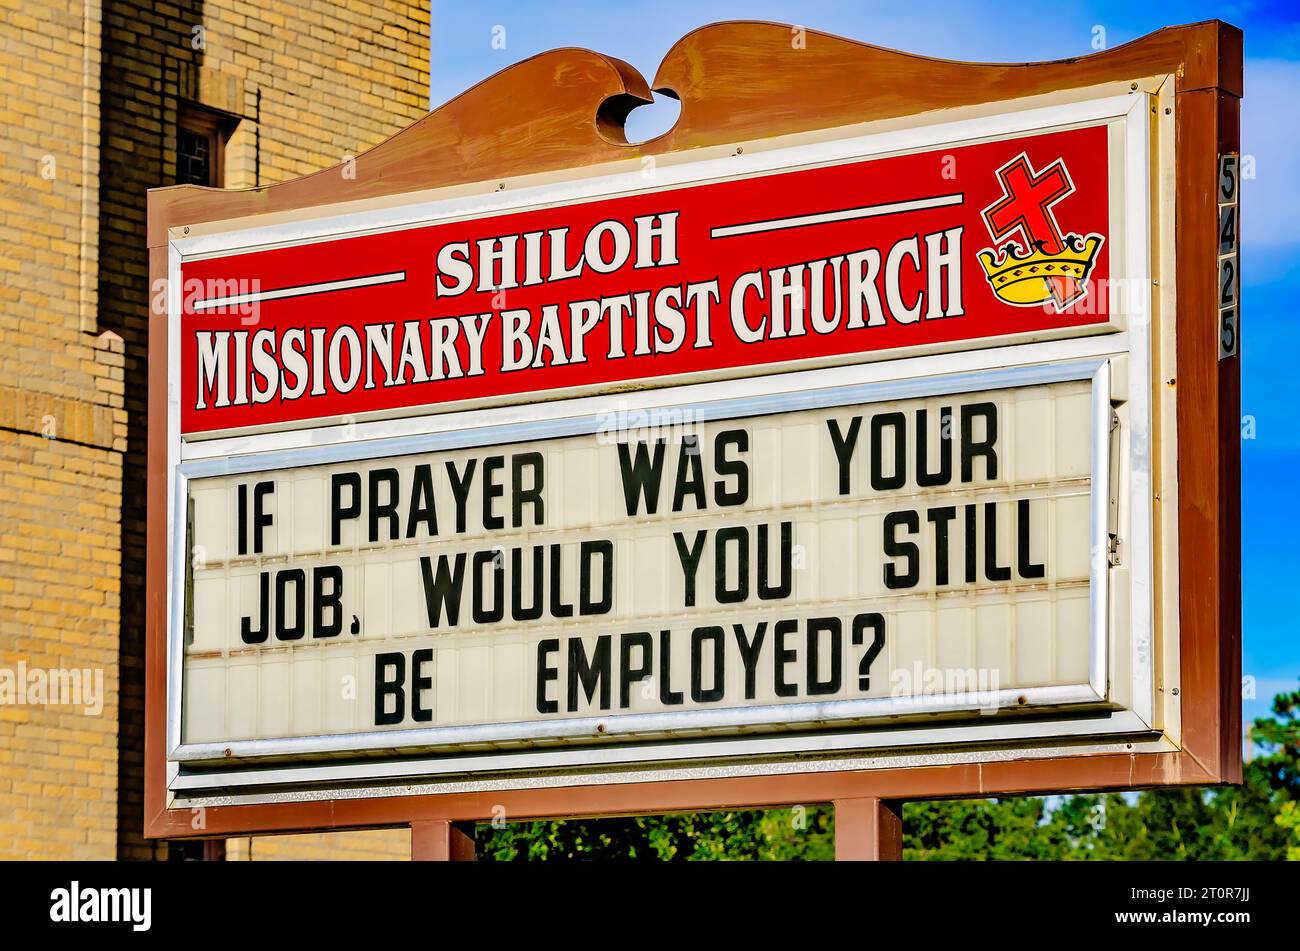 Shiloh Missionary Baptist Church displays a message about prayer on its church sign, Oct. 7, 2023, in Moss Point, Mississippi. Stock Photo